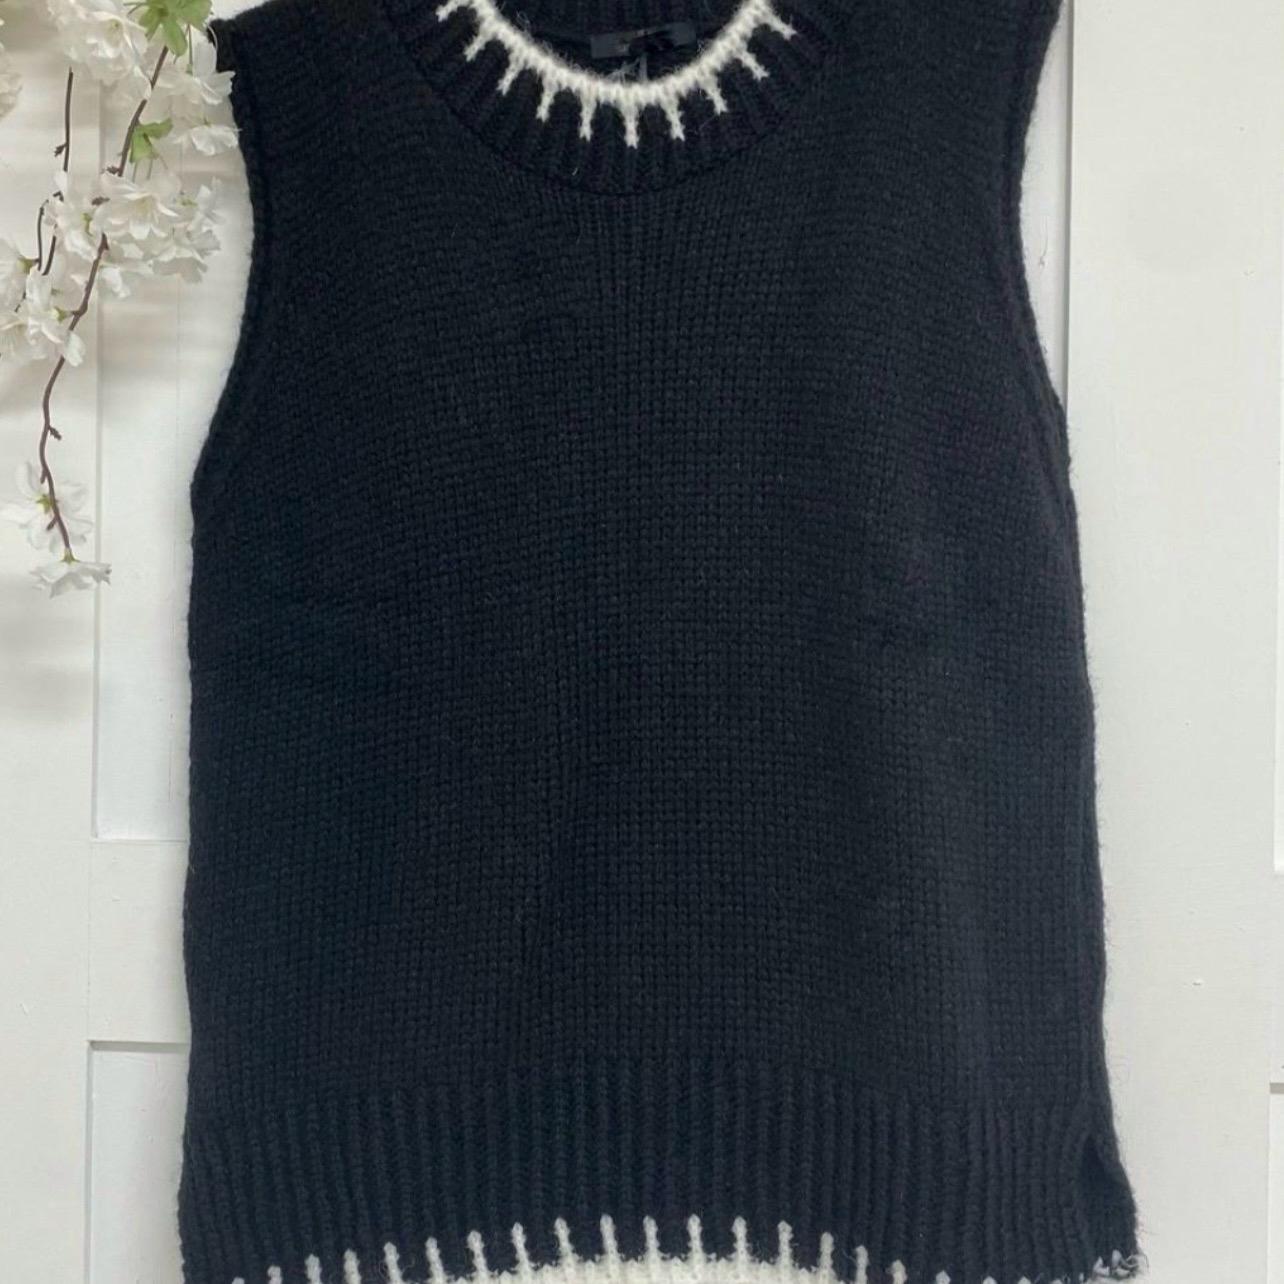 Tilly: Blanket stitch knitted longline tank. One size 18-22